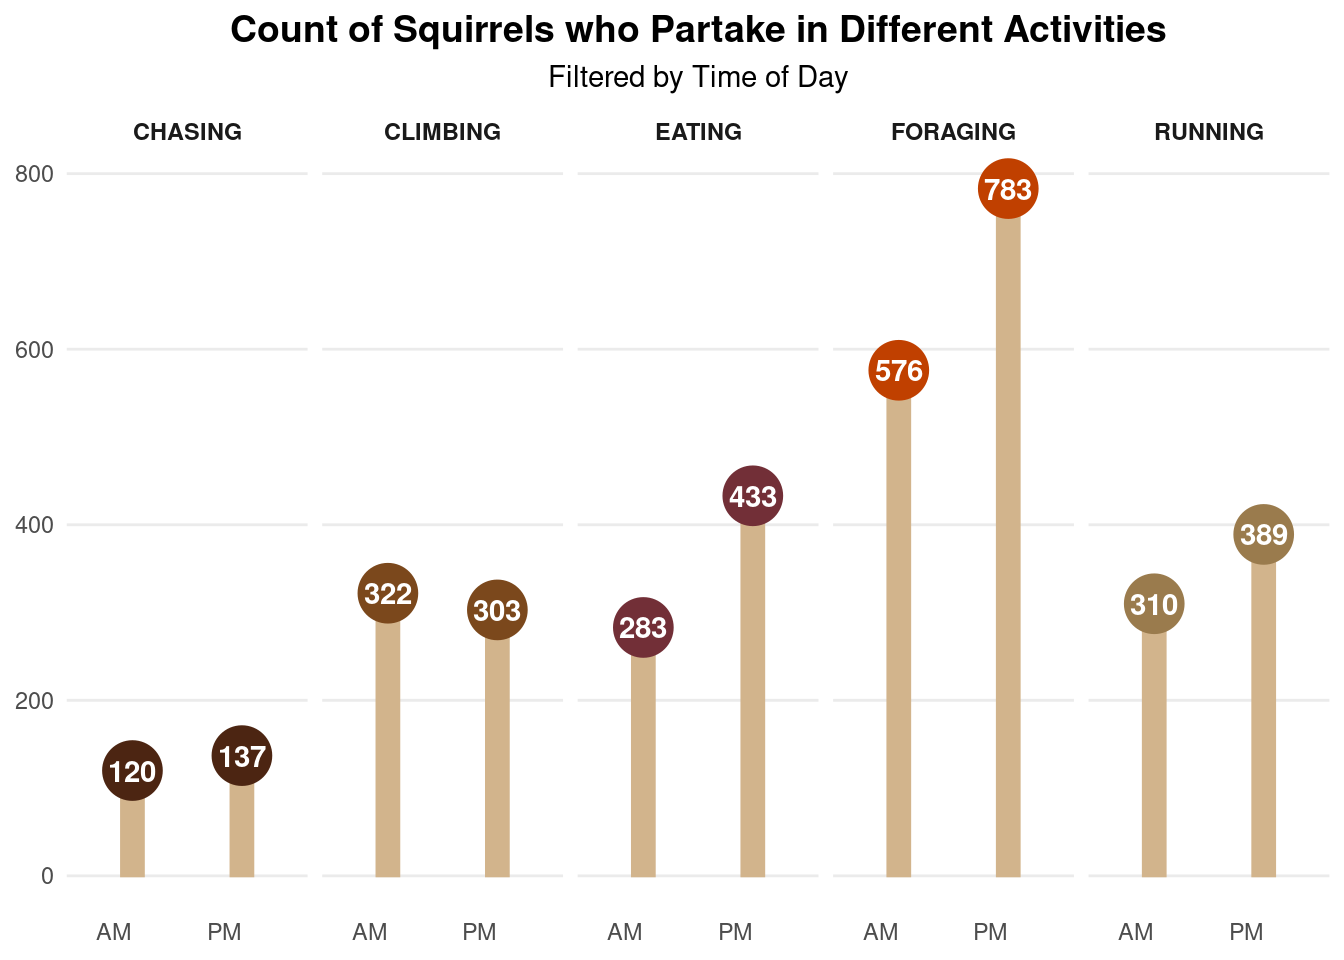 The lollipop chart, Count of Squirrels who Partake in Different Activities, displays the count of squirrels who were found taking part in one of the following activities: chasing, climbing, eating, foraging, and running. Count is displayed from 0 to 800 on the y axis. The activities were filtered by time of day (AM or PM) on the x axis. Squirrels were found chasing the least often. Climbing, eating, and running followed, and they had similar values to one another. Squirrels were found foraging the most, with more squirrels found foraging more in the PM compared to the AM.